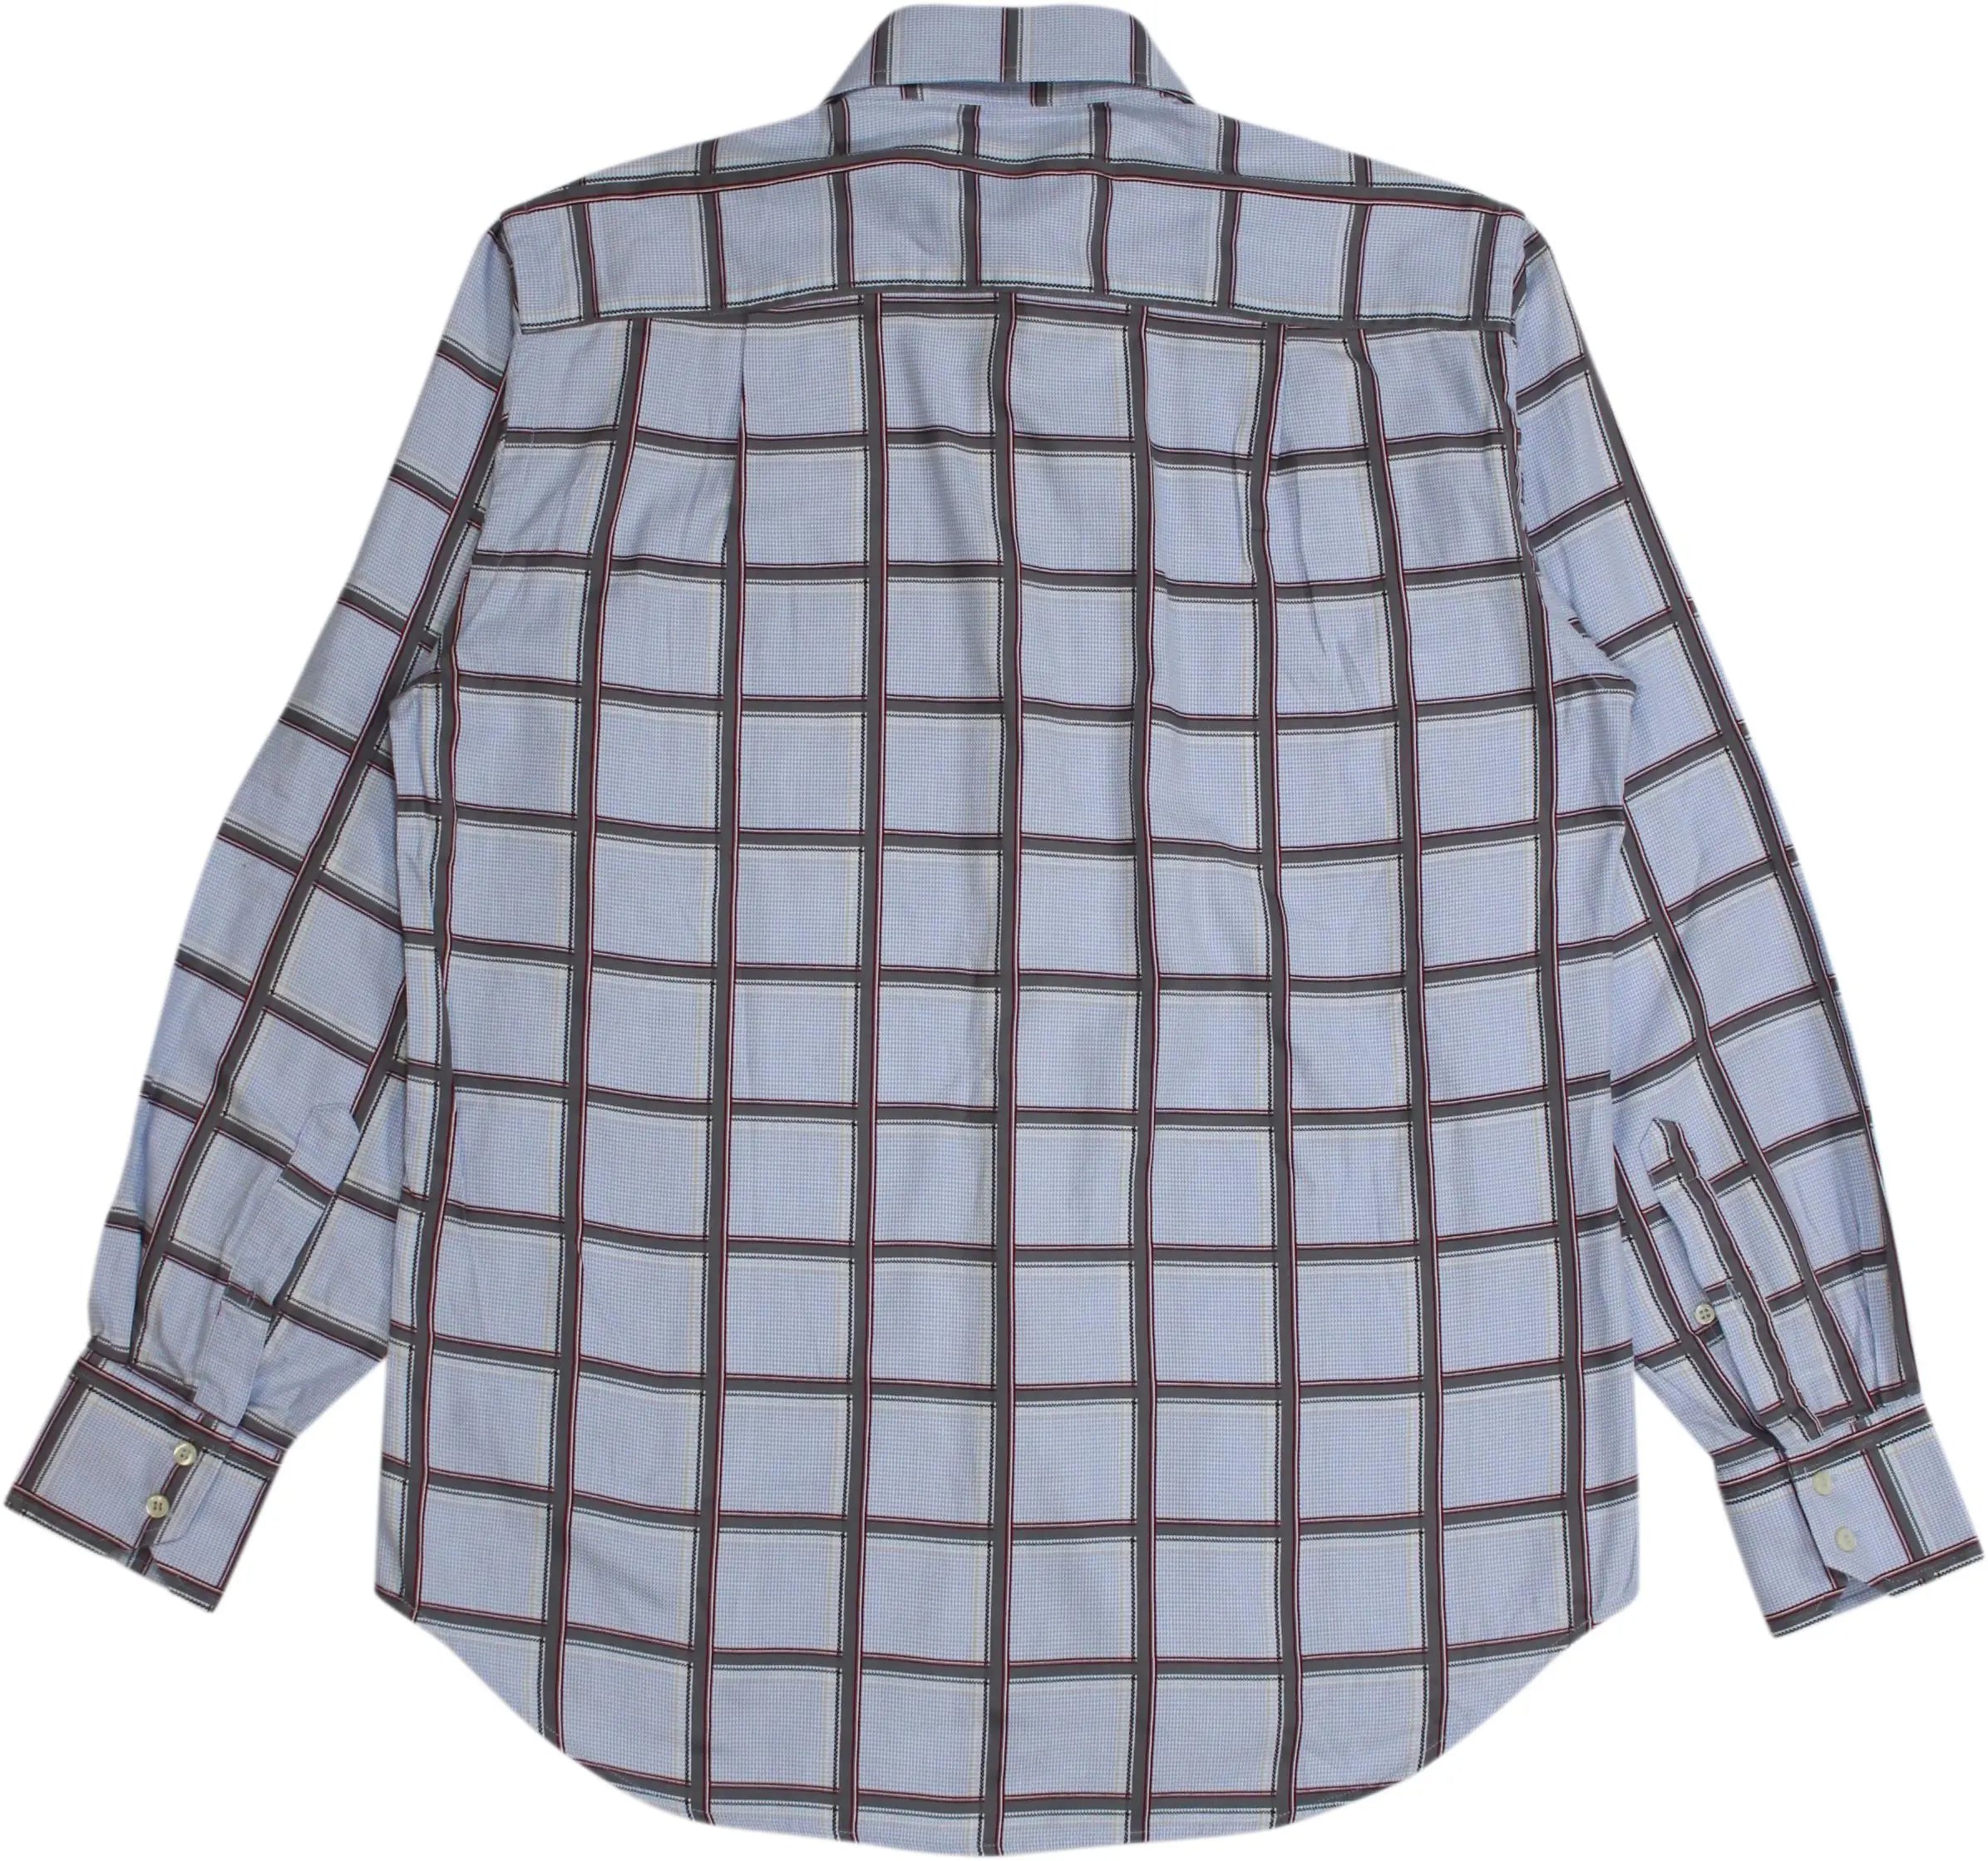 Gianfranco Ferre - Checked Shirt by Gianfranco Ferré- ThriftTale.com - Vintage and second handclothing